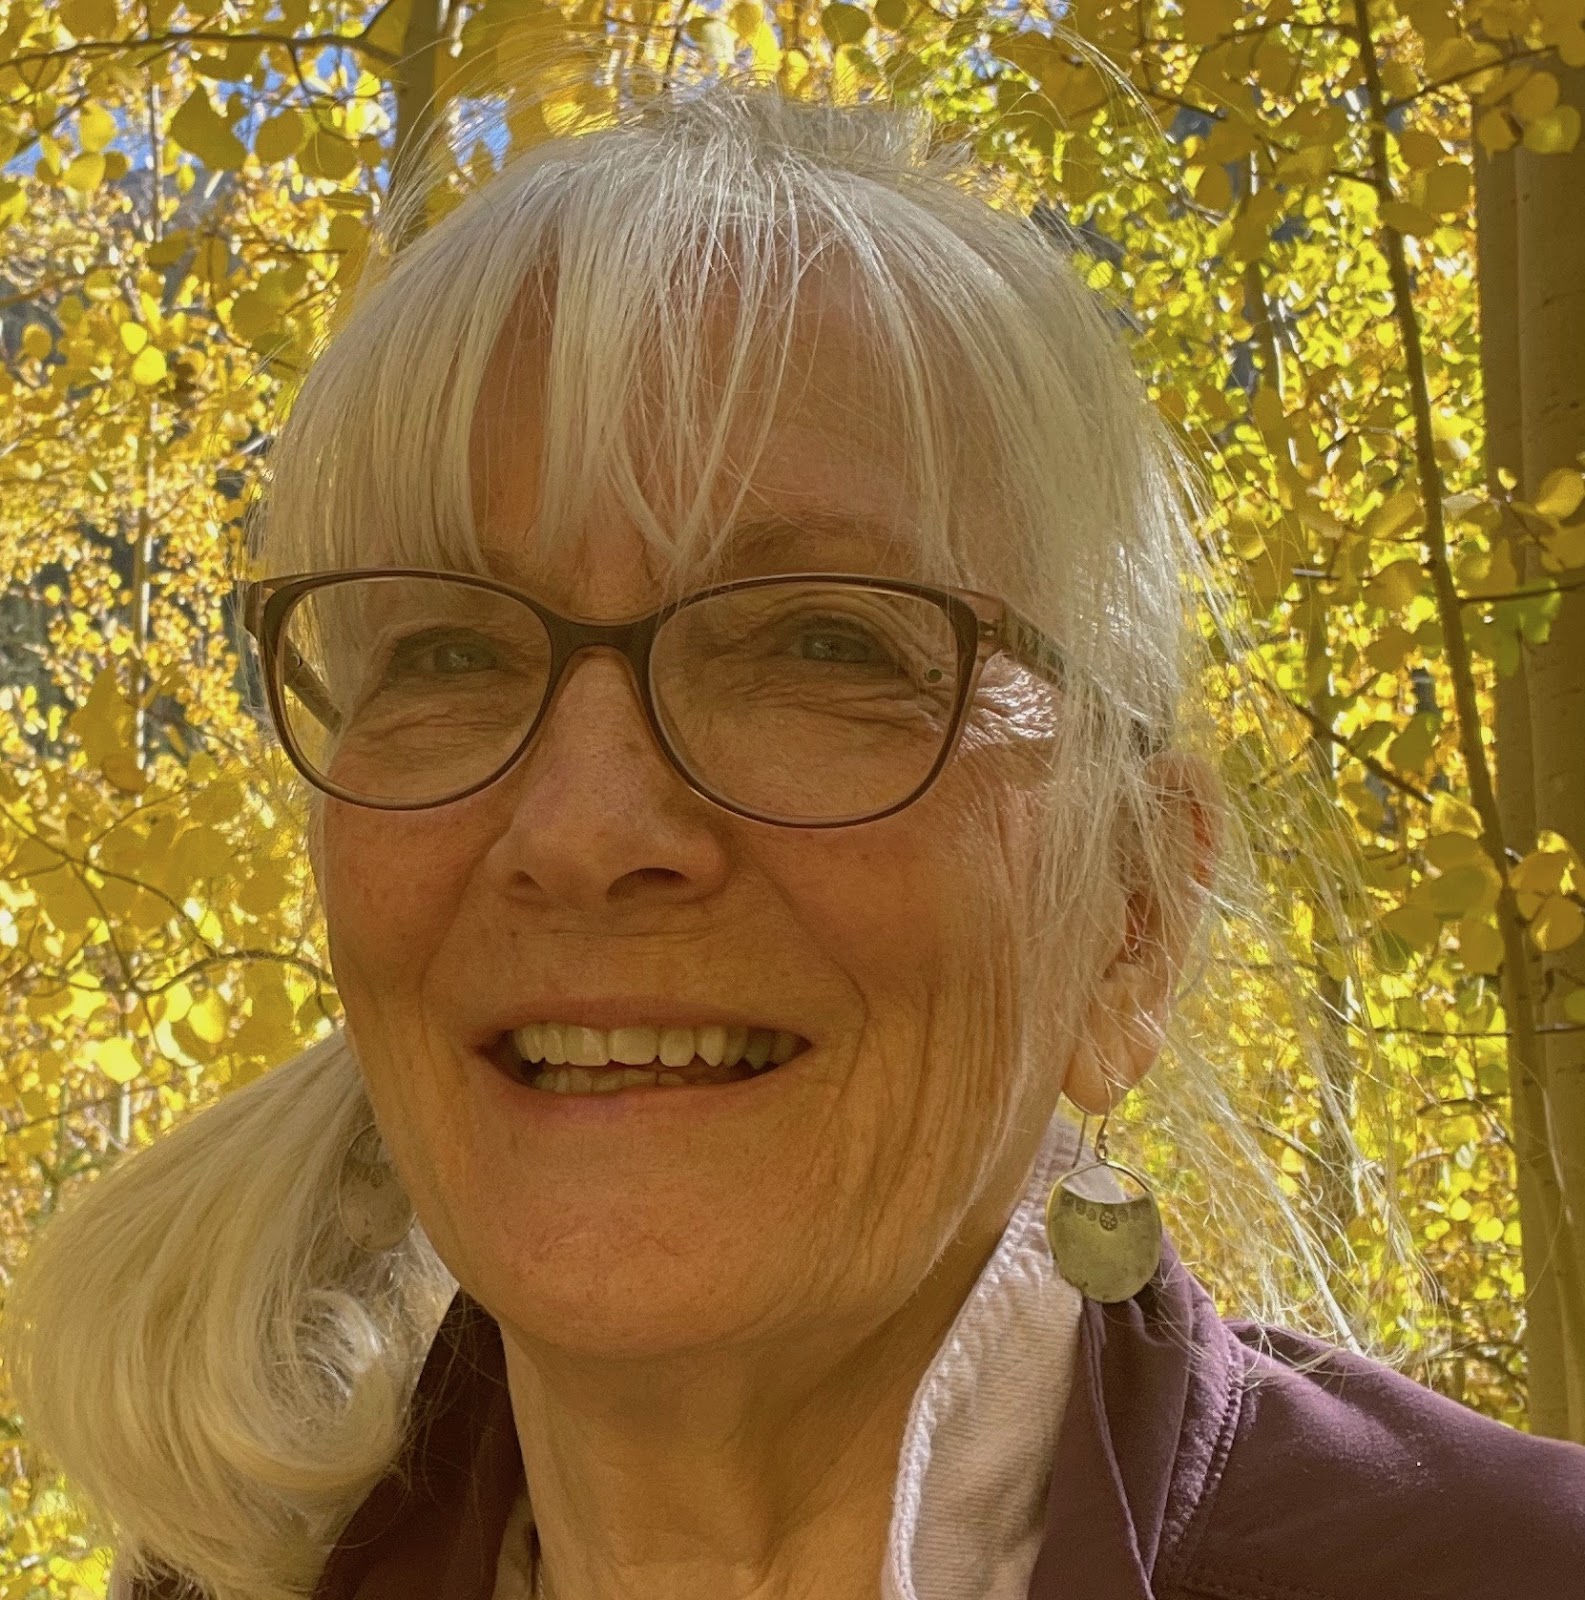 A woman's face is framed by yellow aspen trees. She is smiling and wears glasses.